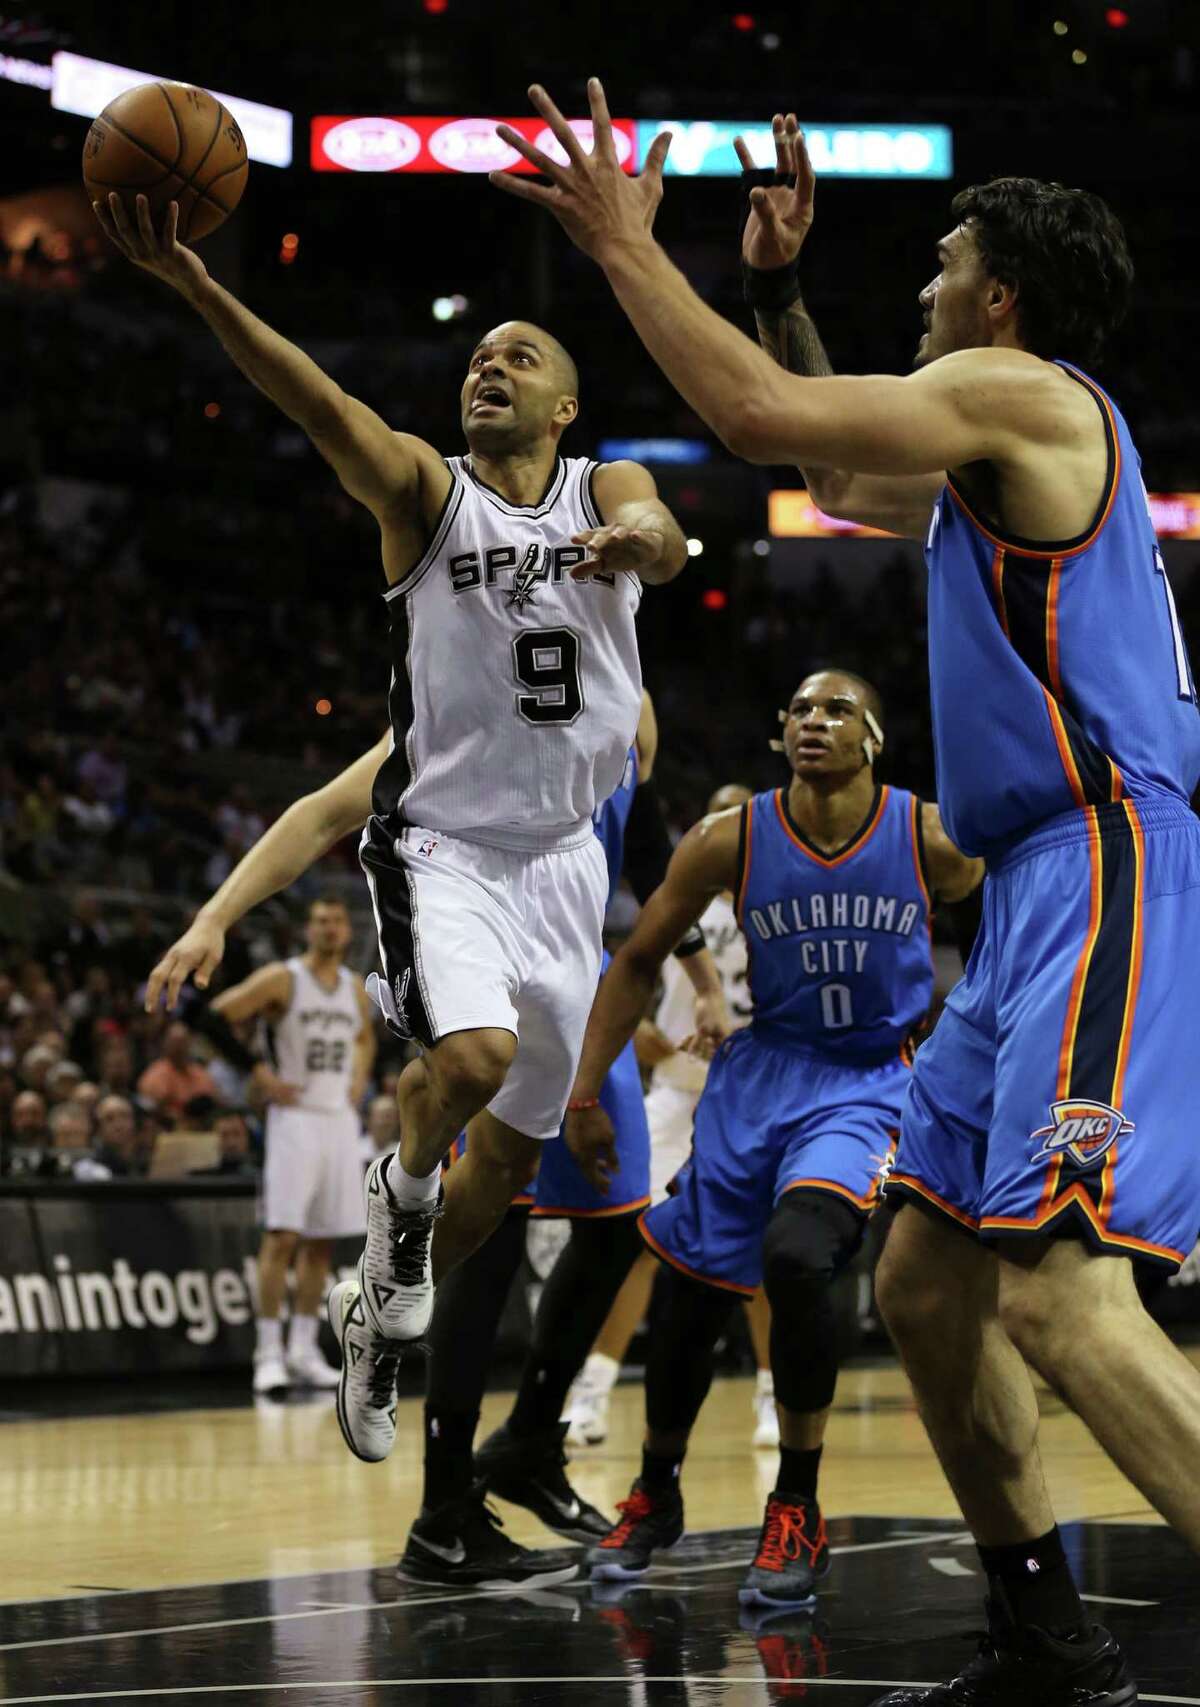 San Antonio Spurs' Tony Parker drives to the basket as Oklahoma City Thunder's Steven Adams defends during the first half at the AT&T Center, Wednesday, March 25, 2015.